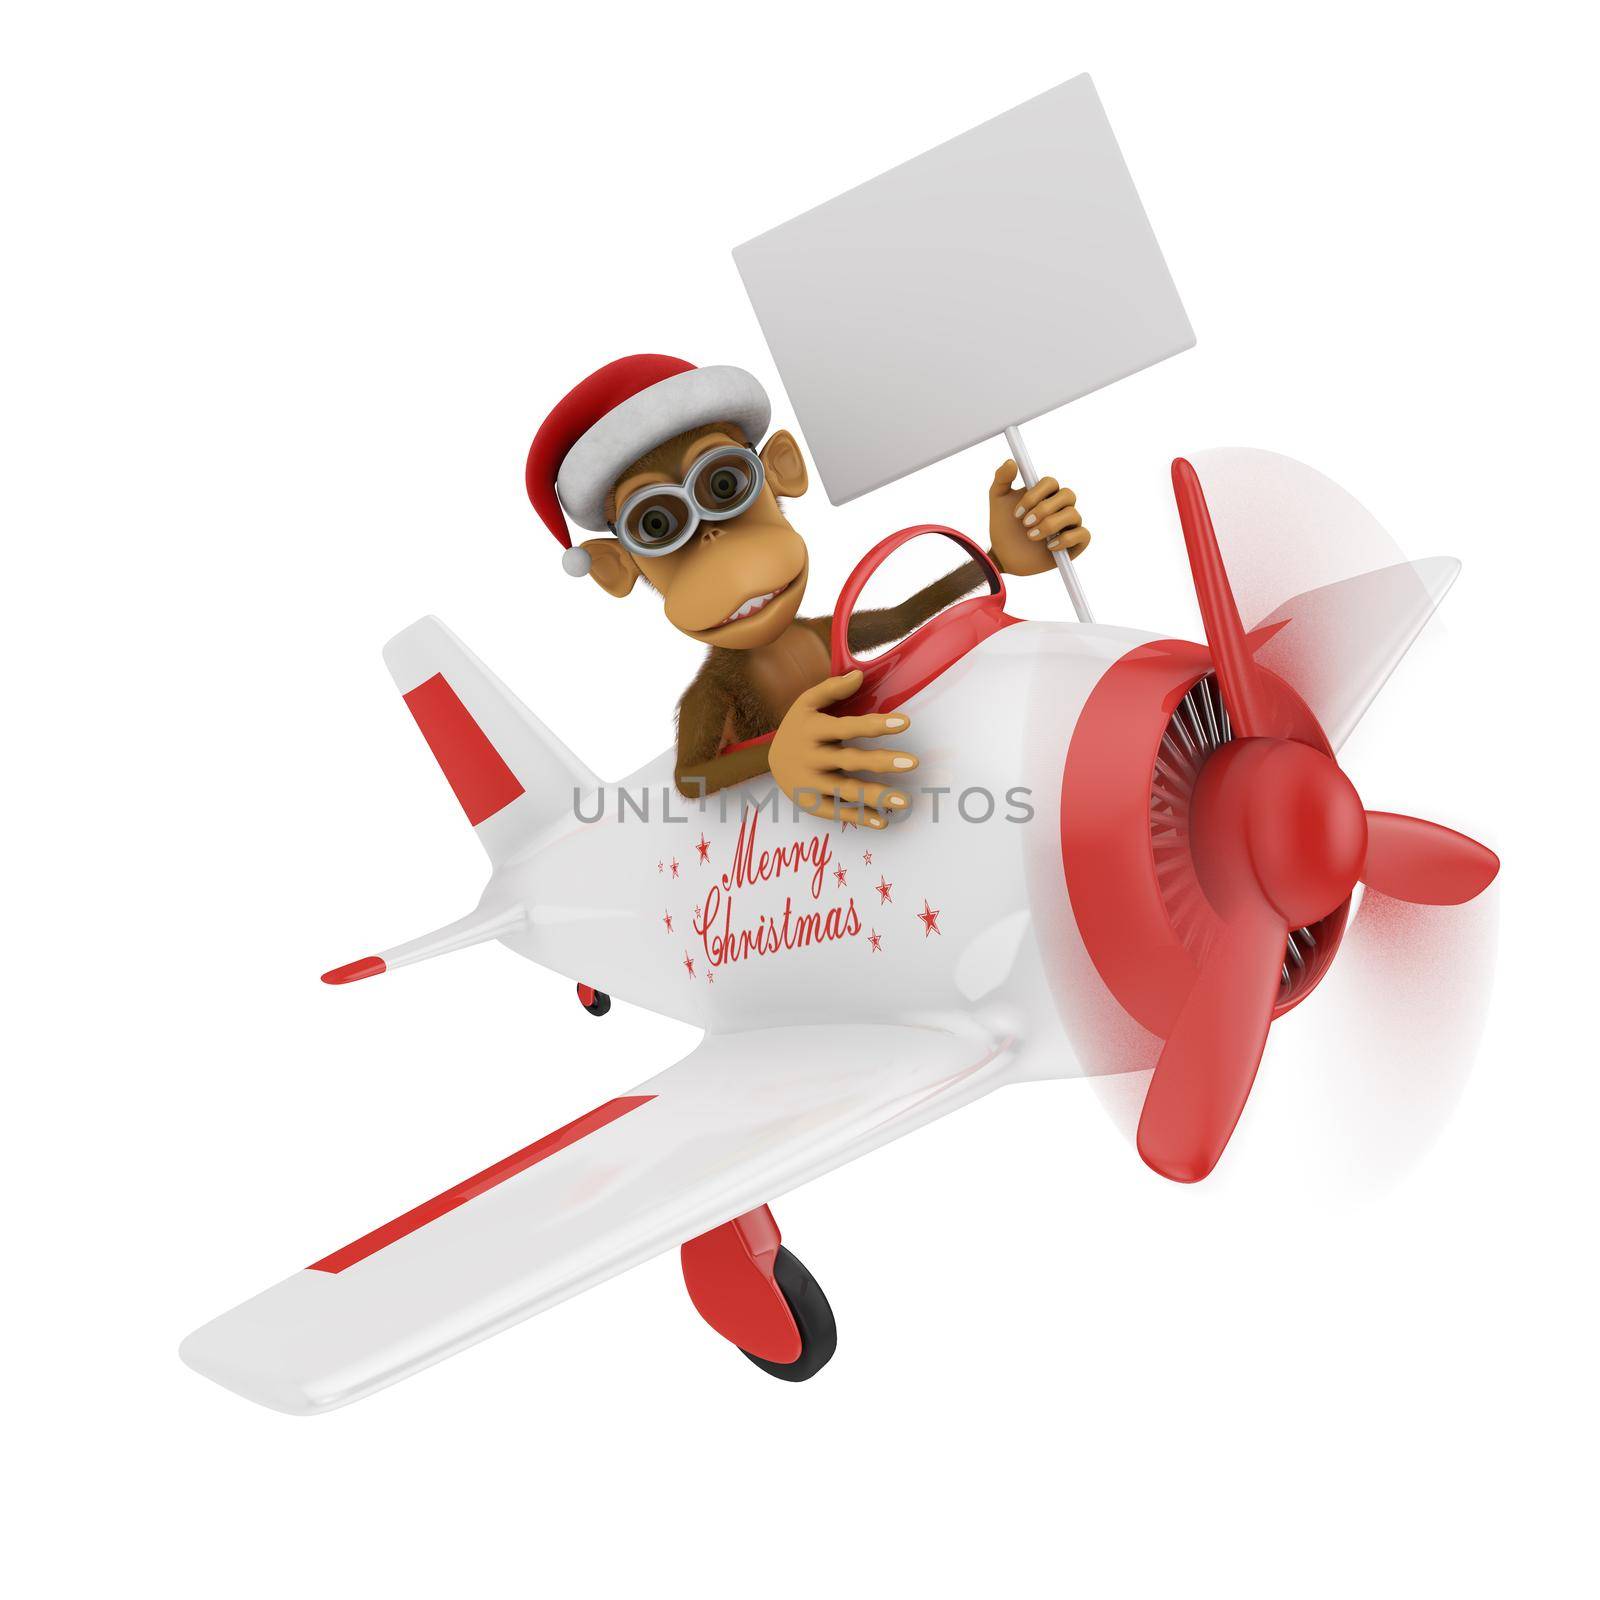 monkey with a Santa hat on his head in an airplane with the inscription Merry Christmas